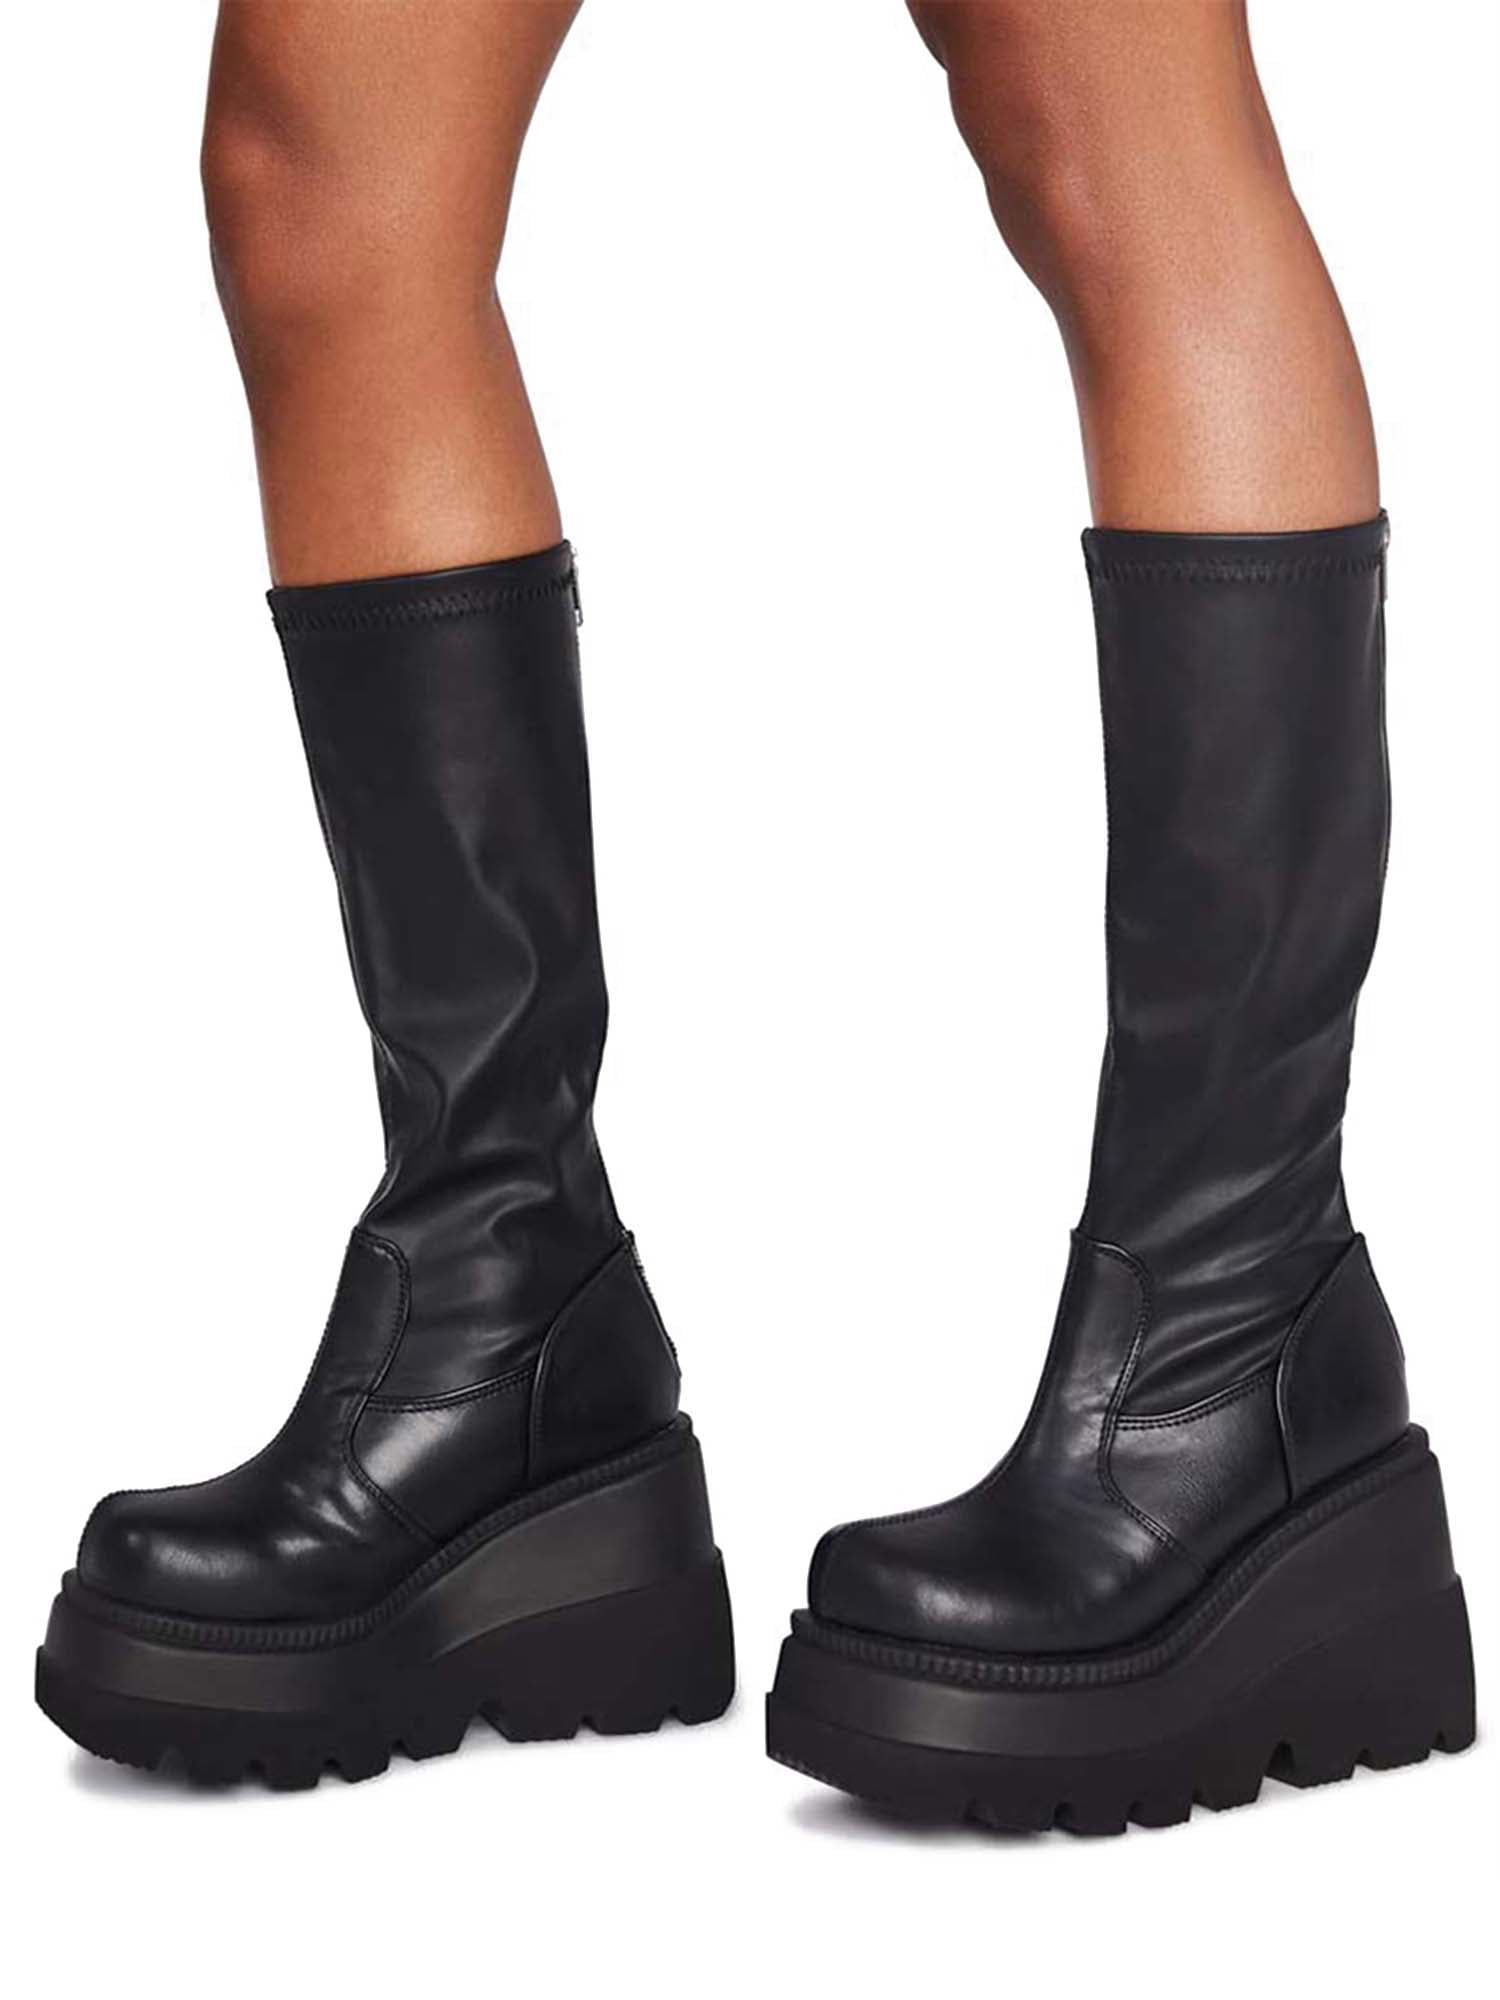 Details about   Womens Platform Stretchy Boots Comfy Black Goth Pull On Punk Ankle Shoes 35/44 L 